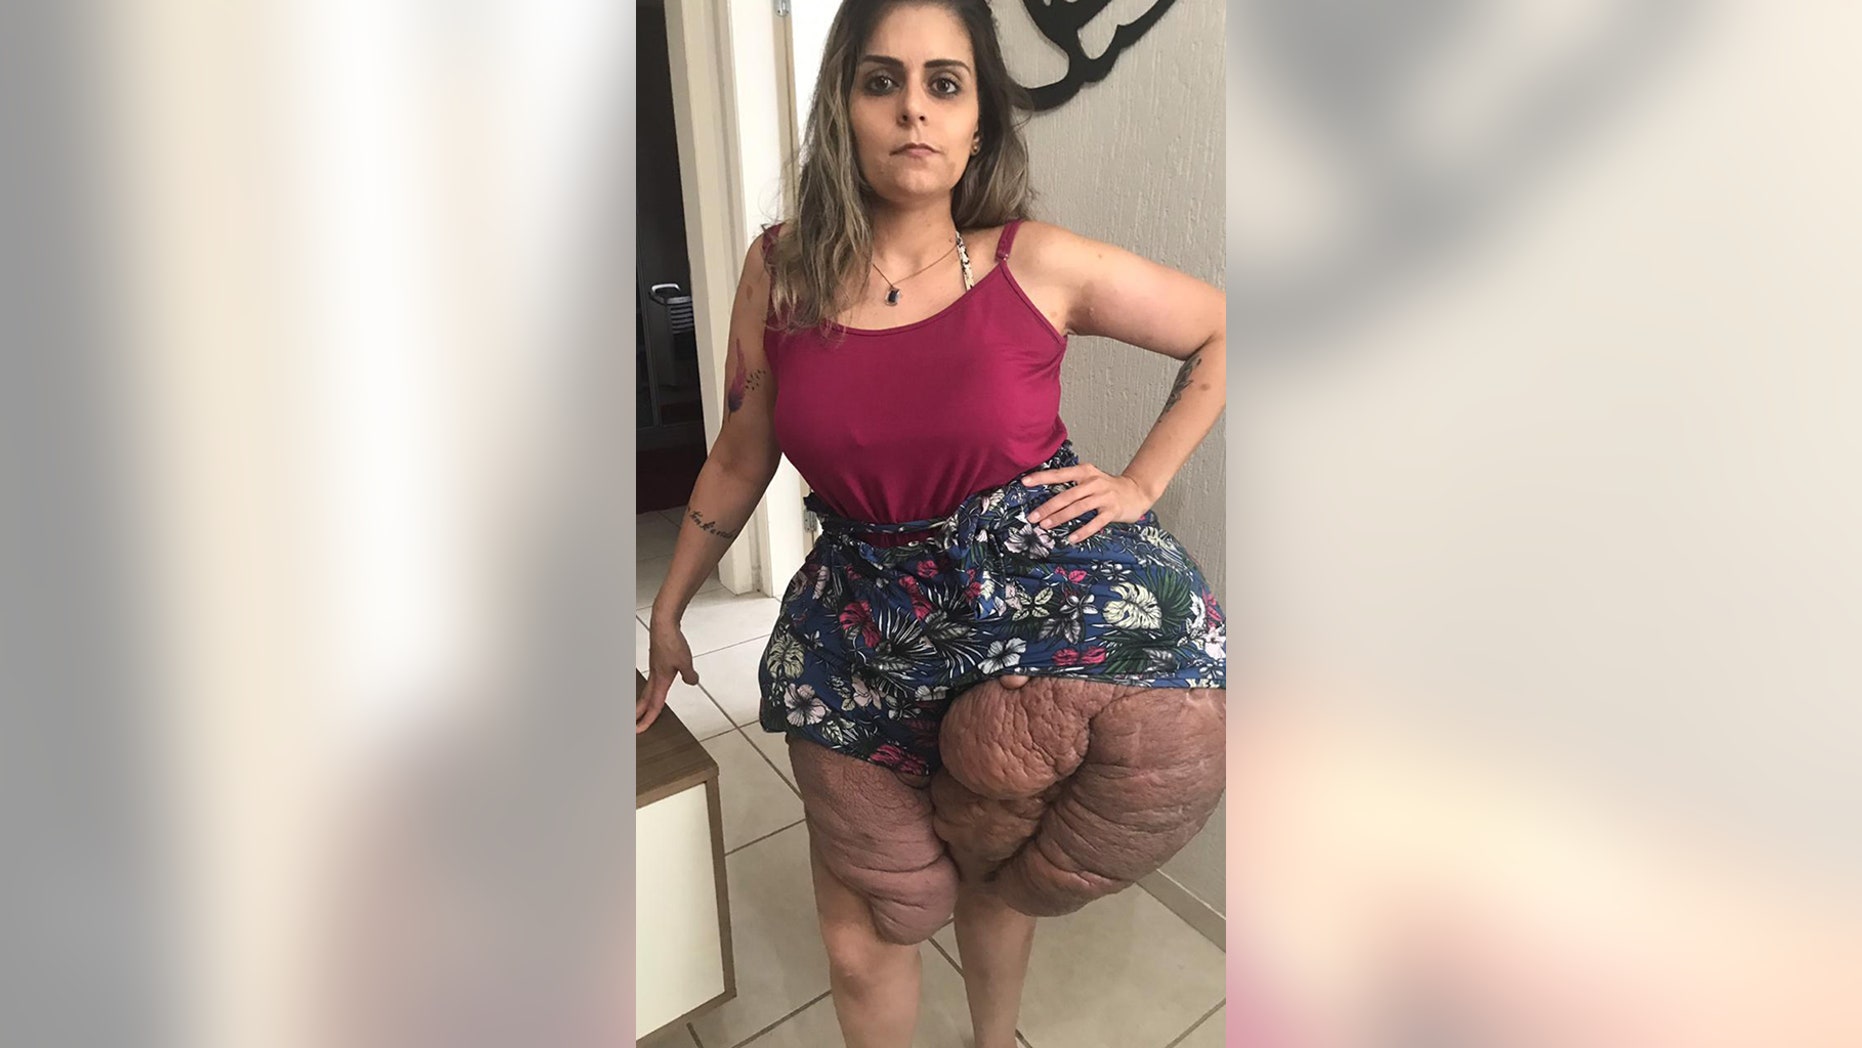 Woman suffering from massive tumors on legs facing incurable disorder